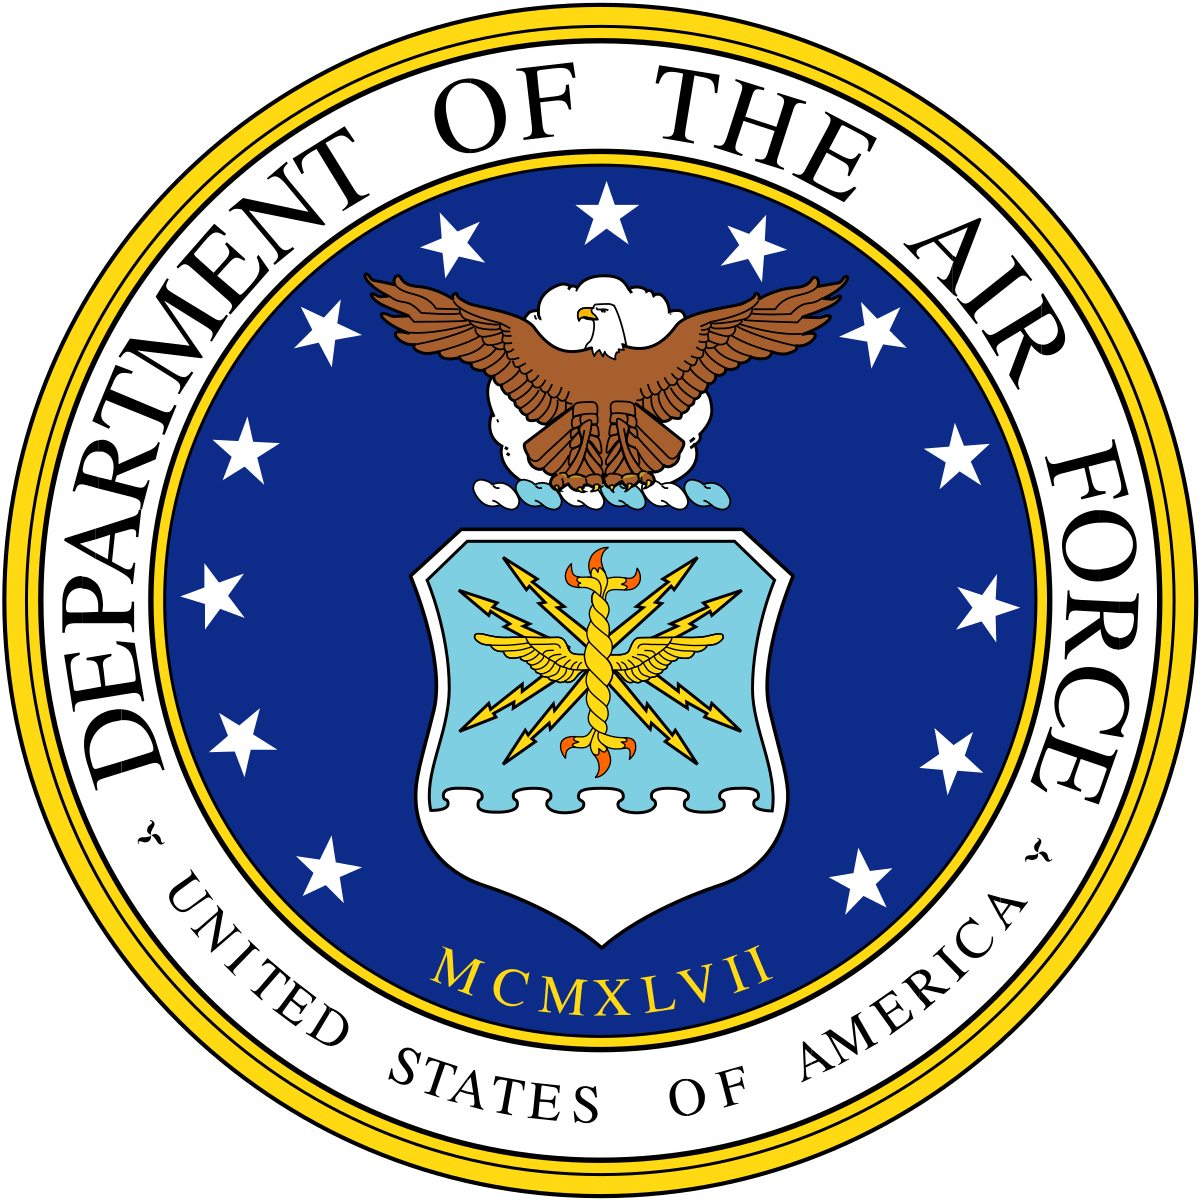 1200px-Seal_of_the_United_States_Department_of_the_Air_Force.svg.png